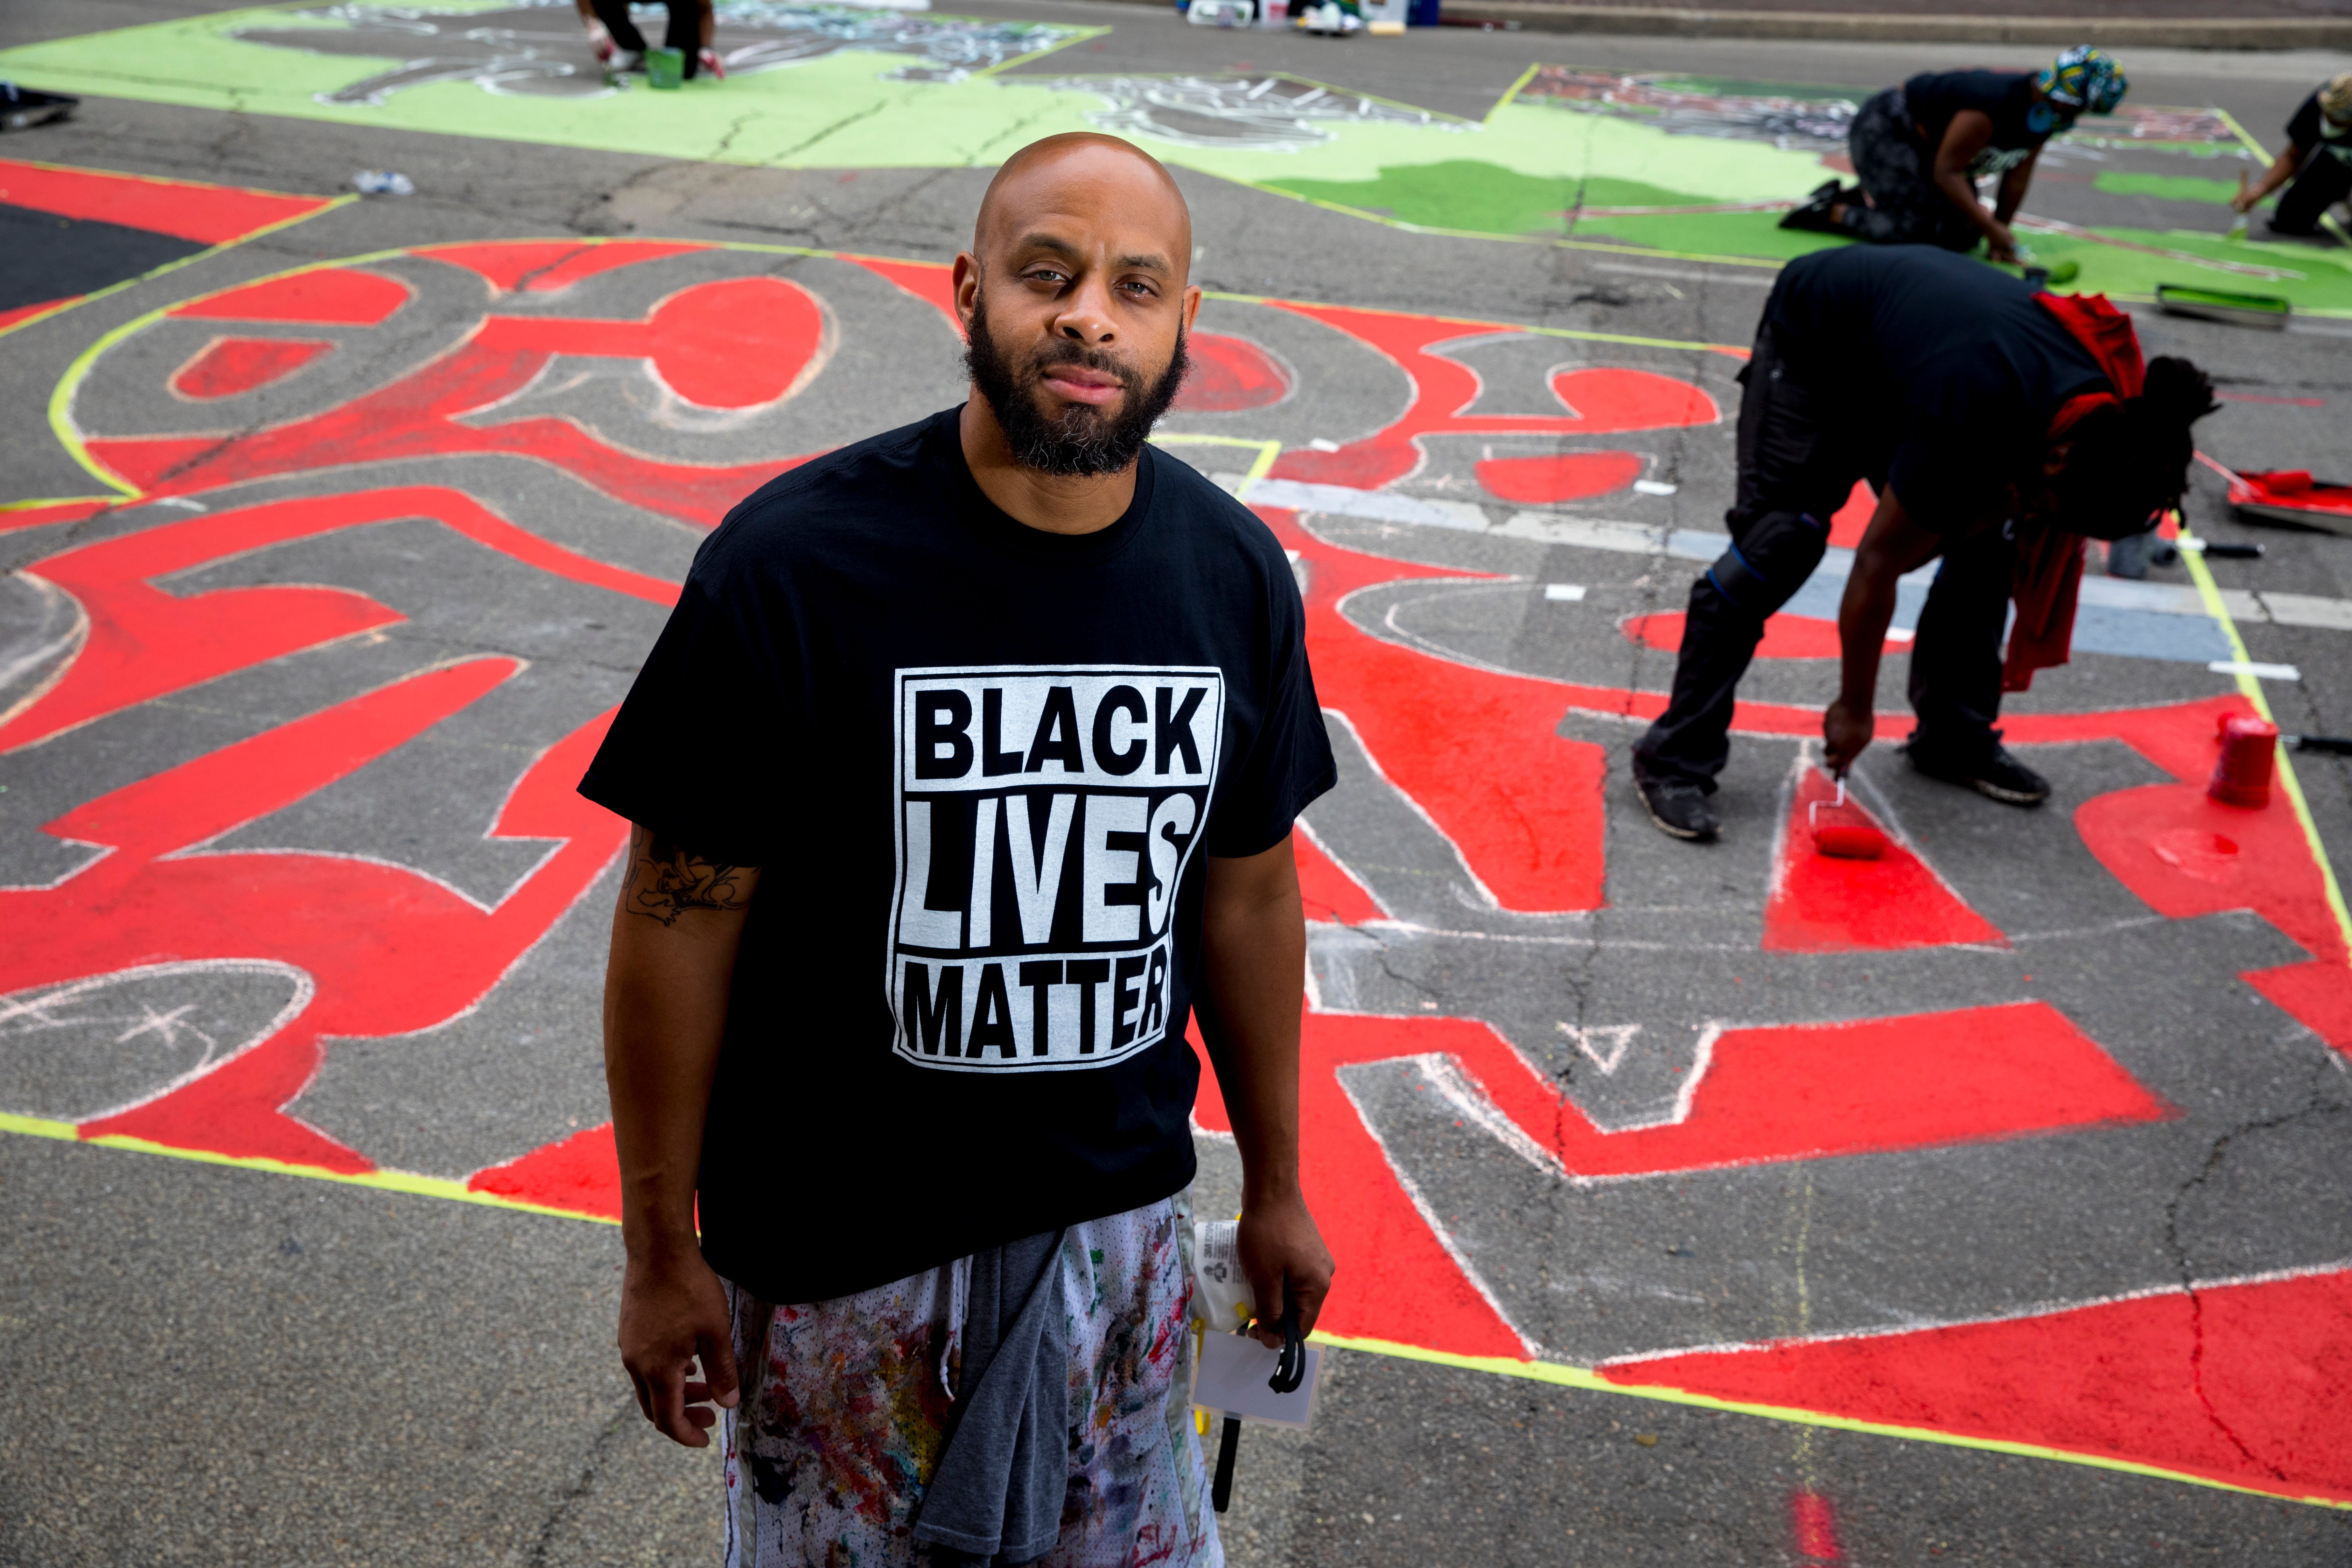 Brandon Hawkins stands next to the letter 'B' that he is creating as part of a bigger mural that reads "Black Lives Matter!" Thursday, June 18, 2020, on Plum Street in front of City Hall in Cincinnati. Seventeen local Black artists were charged with designing and creating a letter to be part of the mural.